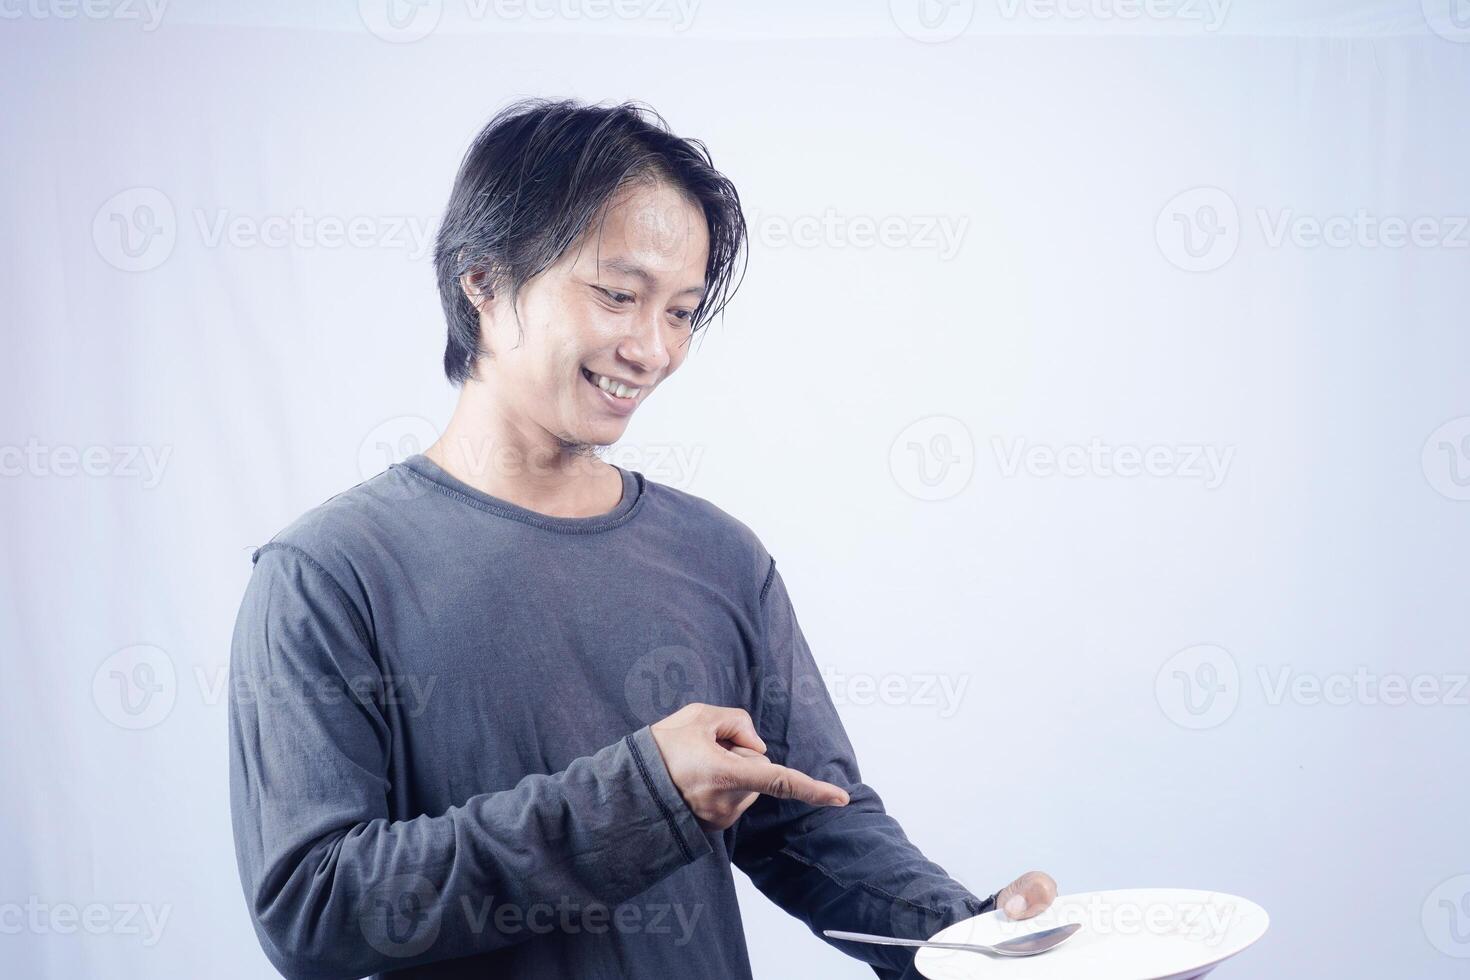 asian man pointing towards empty plate with happy expression isolated white background for coffee photo space. food menu presentation concept.